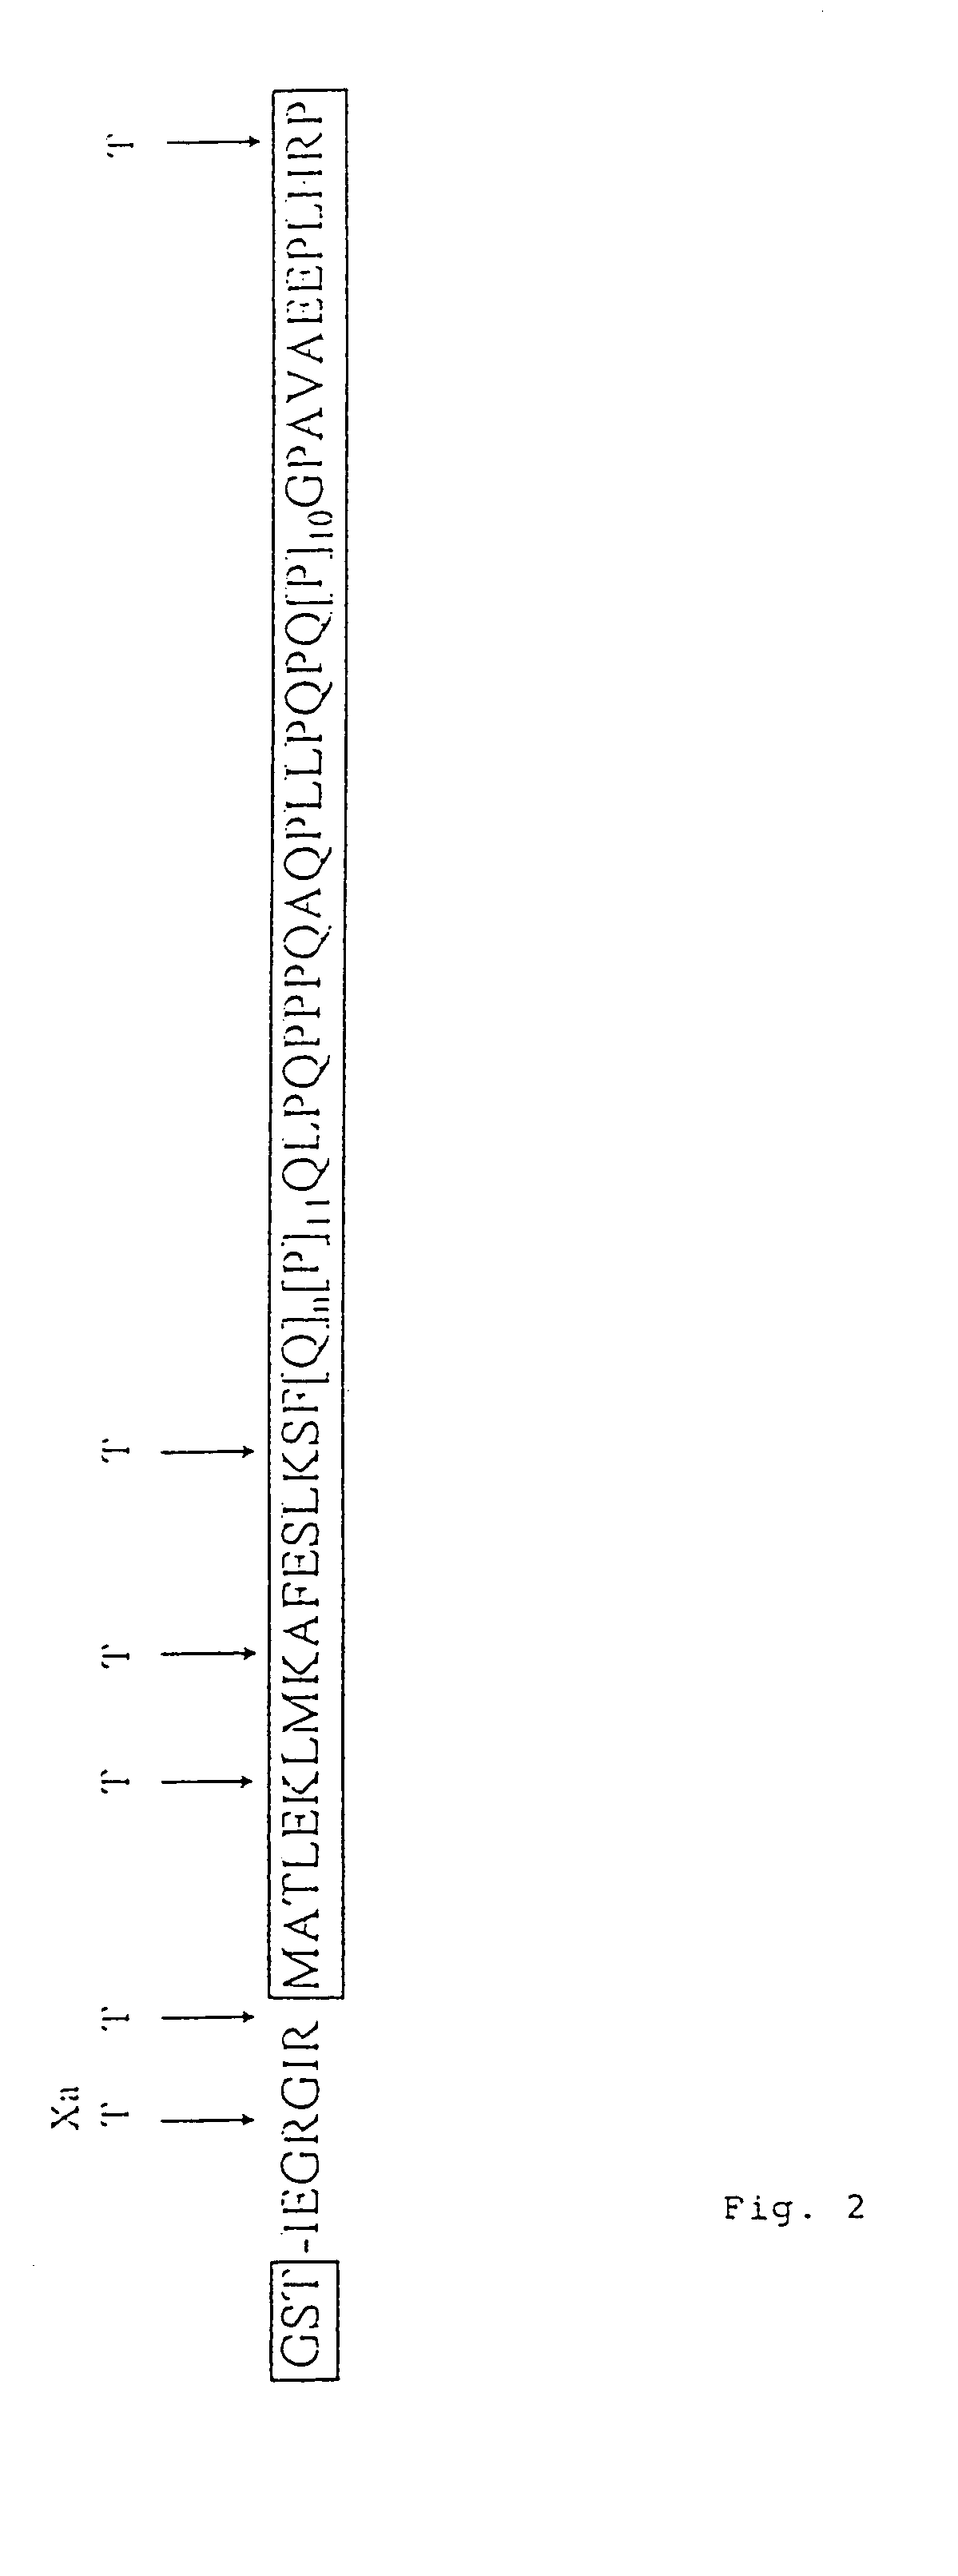 Composition and method for the detection of diseases associated with amyloid-like fibril or protein aggregate formation